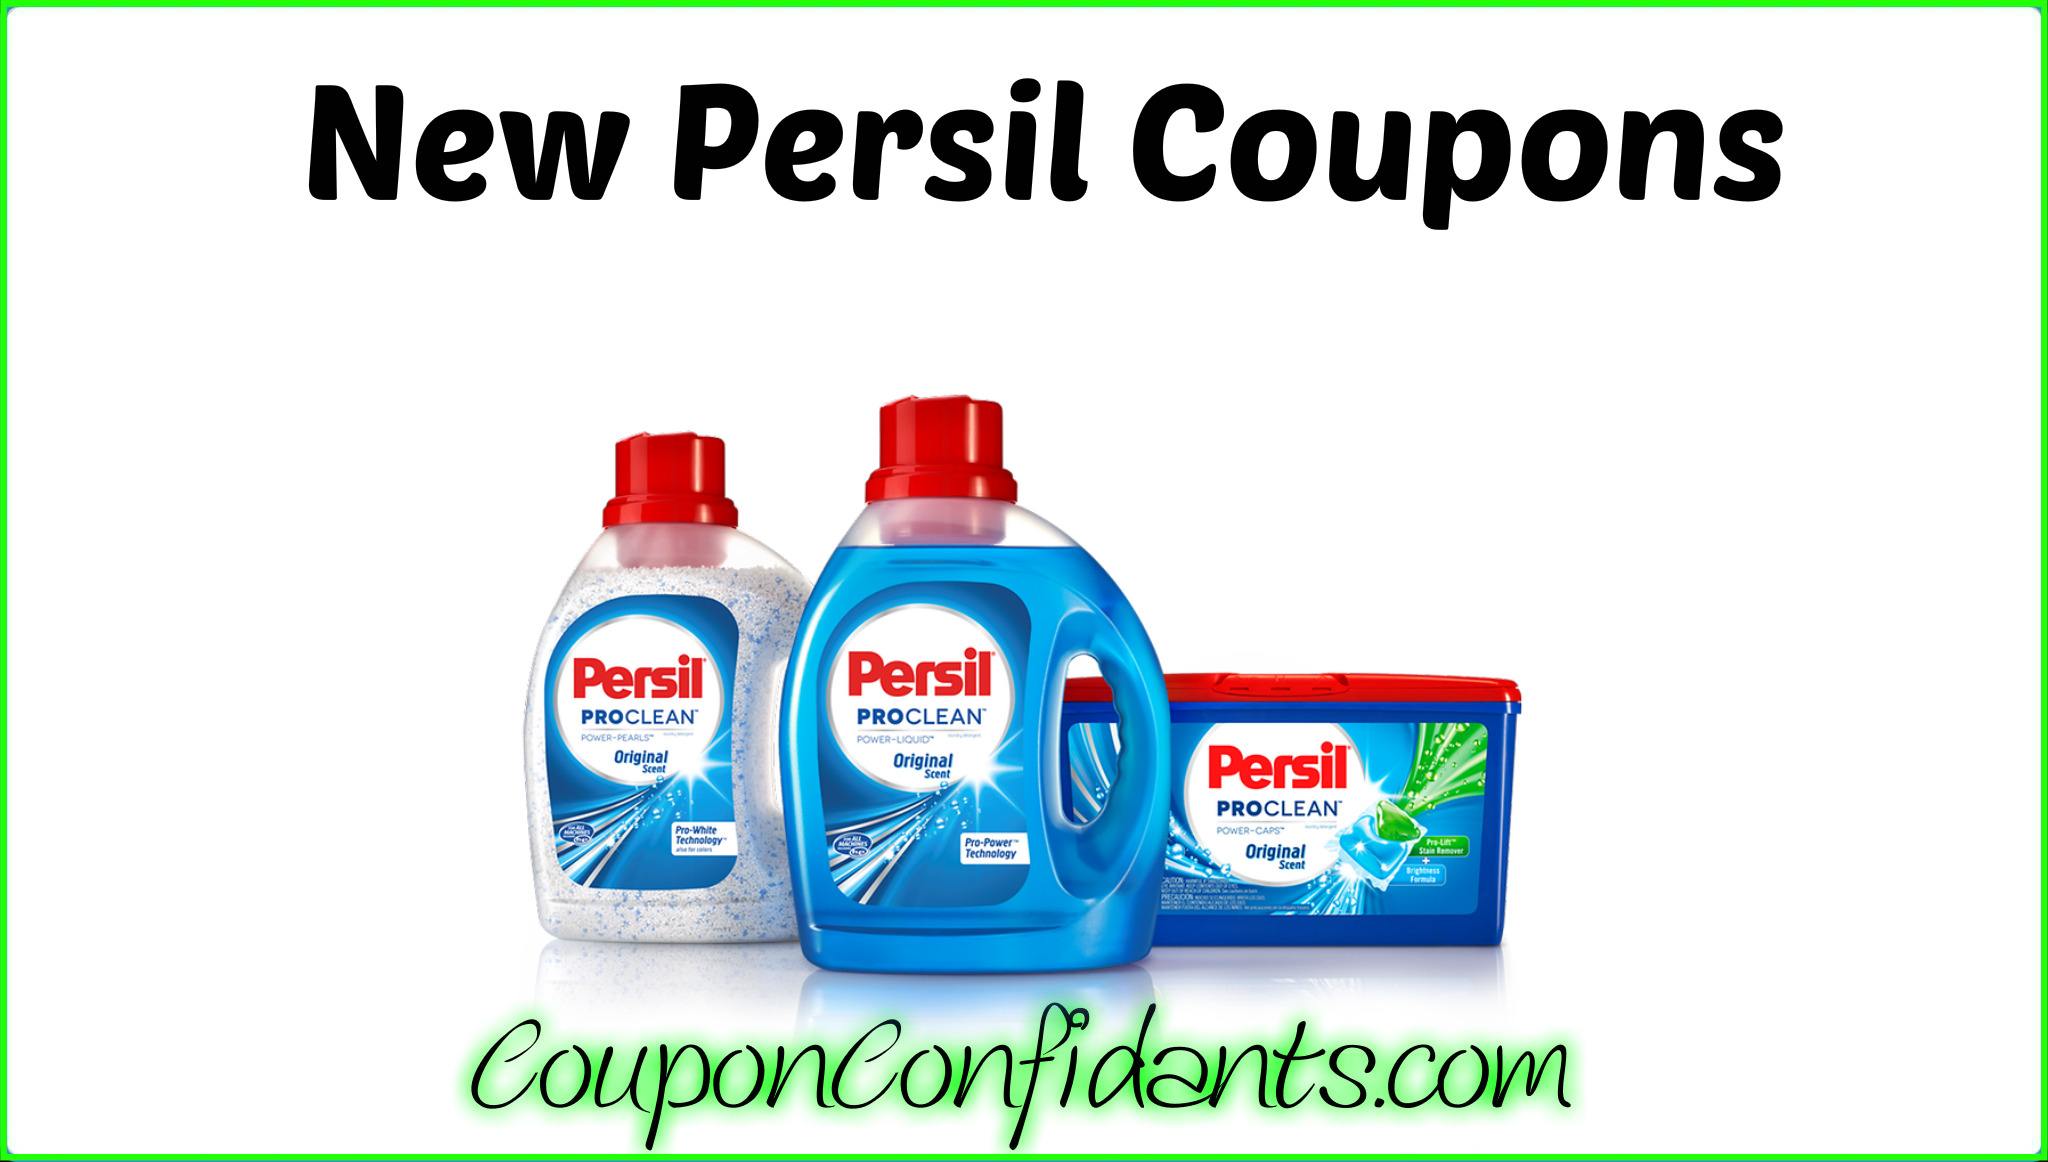 NEW Persil Coupons Sales at All drug stores AND Target ⋆ Coupon